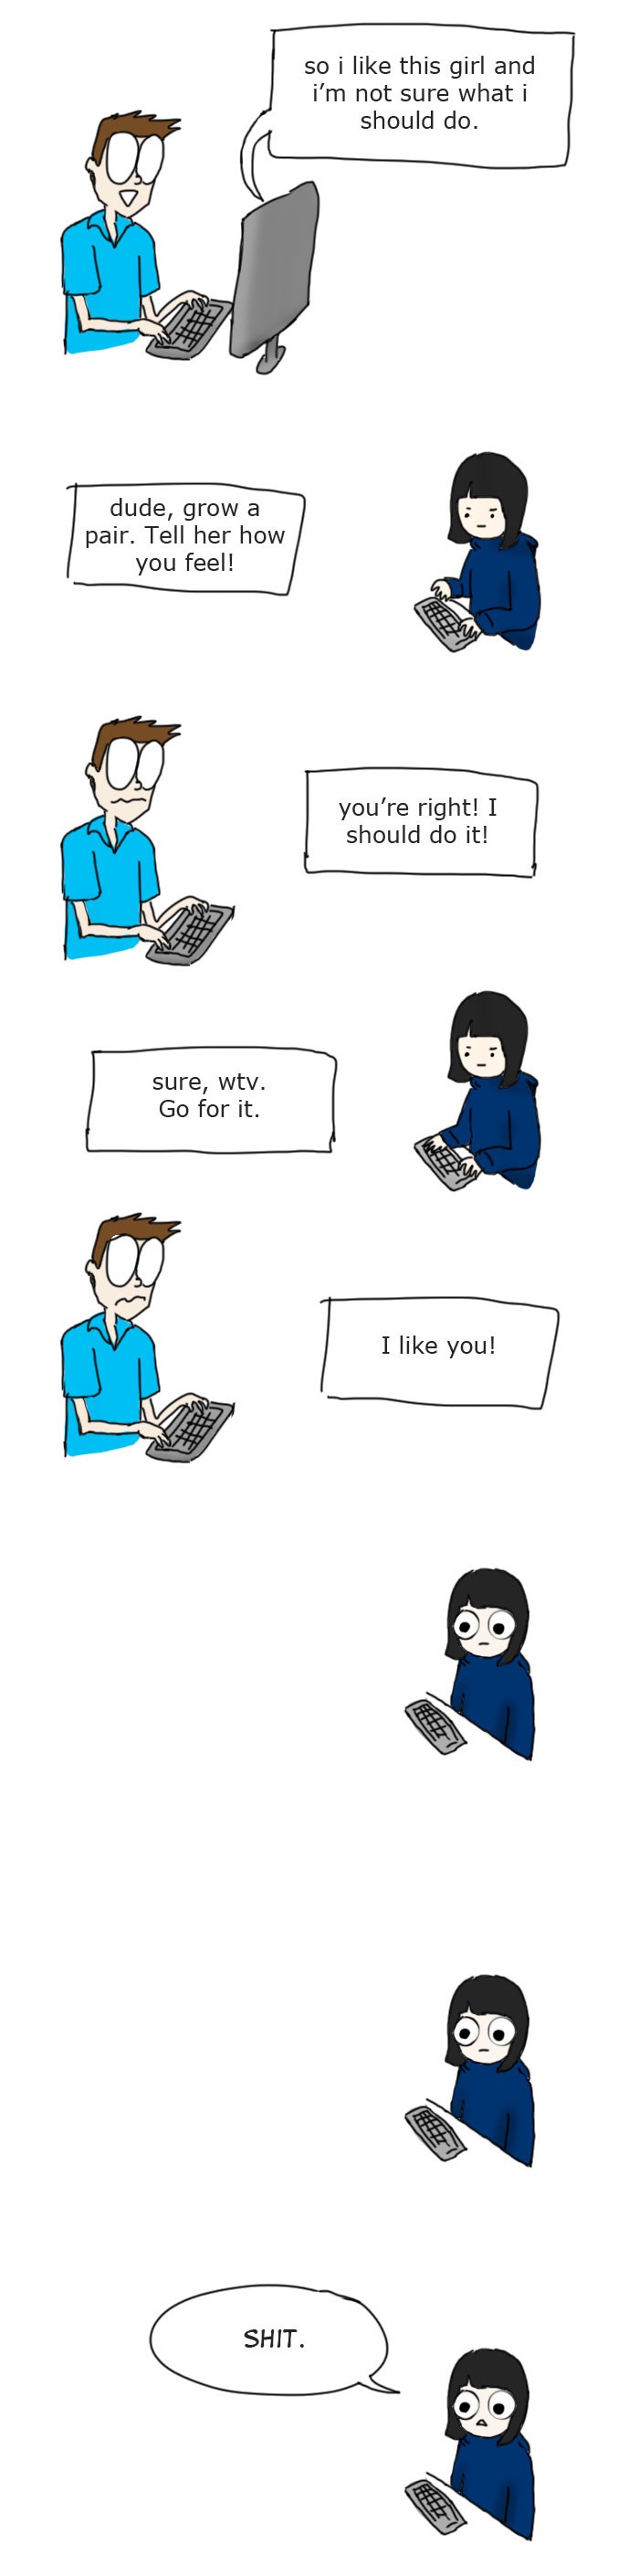 how to tell a girl you like her, internet, awkward